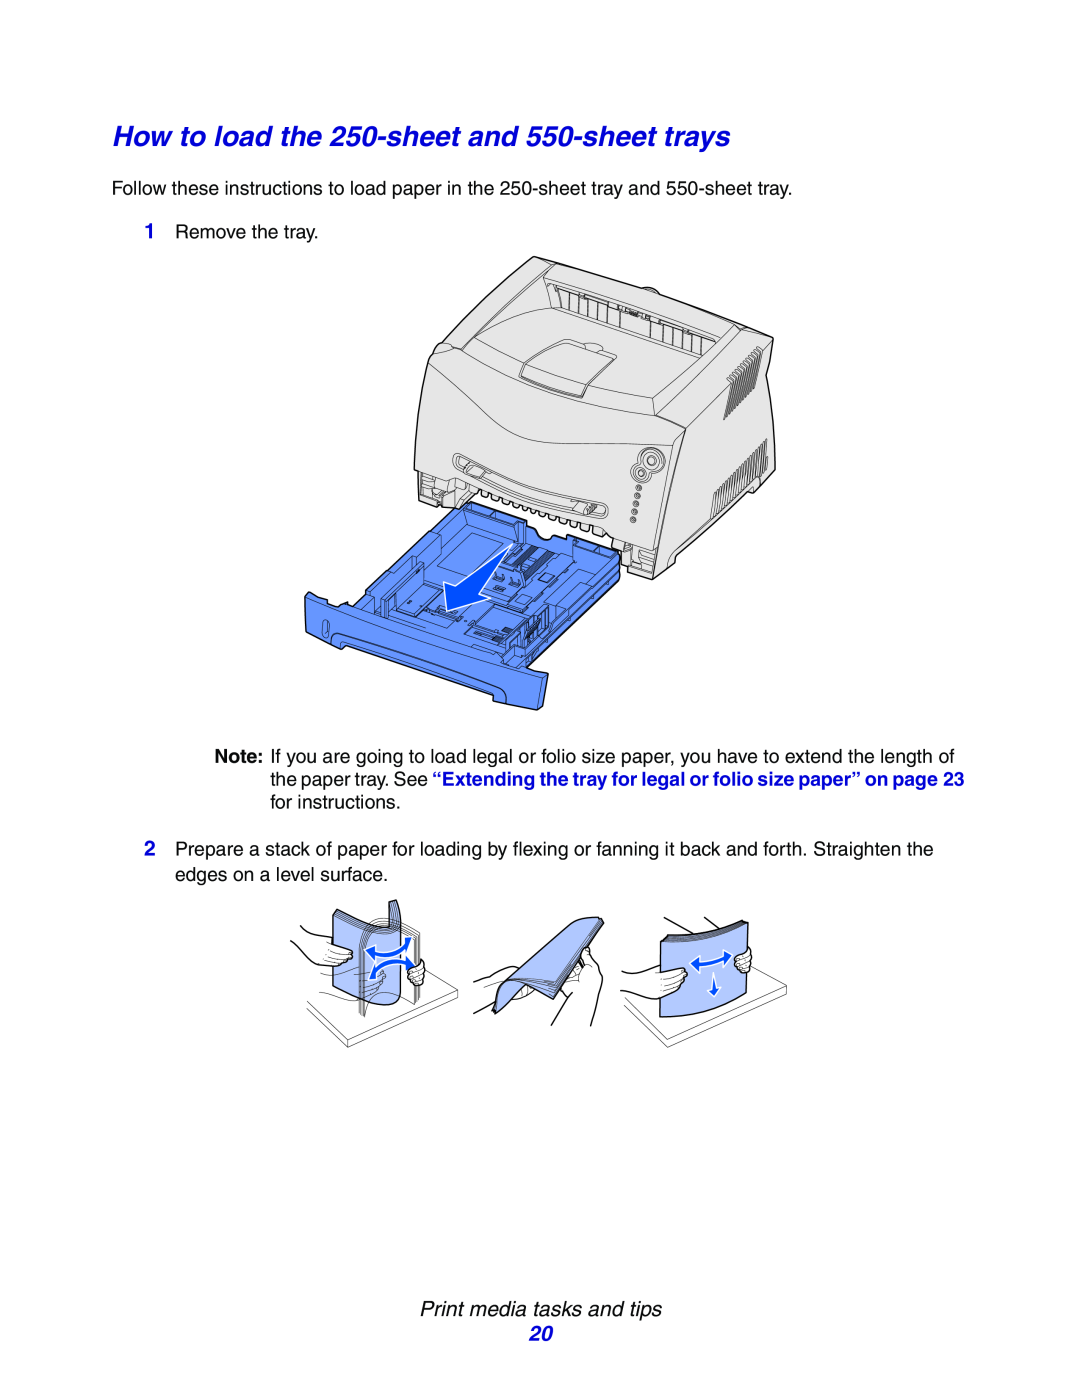 Lexmark E234N manual How to load the 250-sheetand 550-sheettrays, Print media tasks and tips 